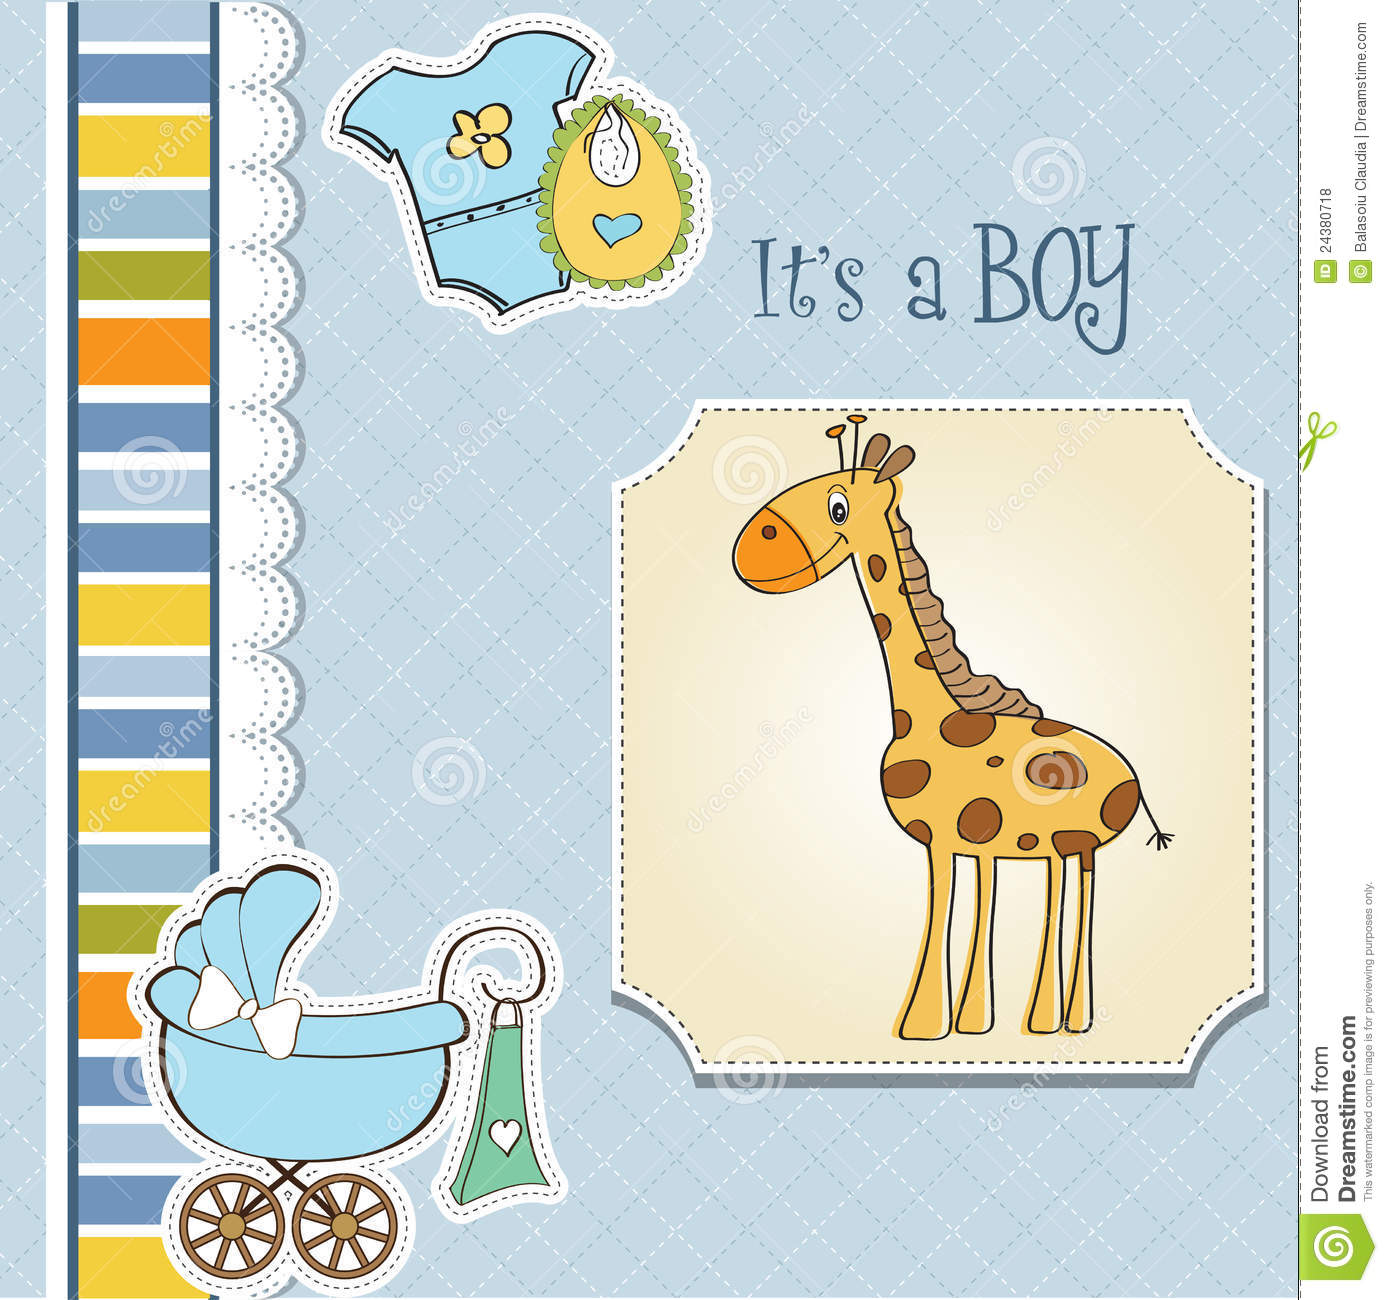 It's A Boy Greeting Card Image